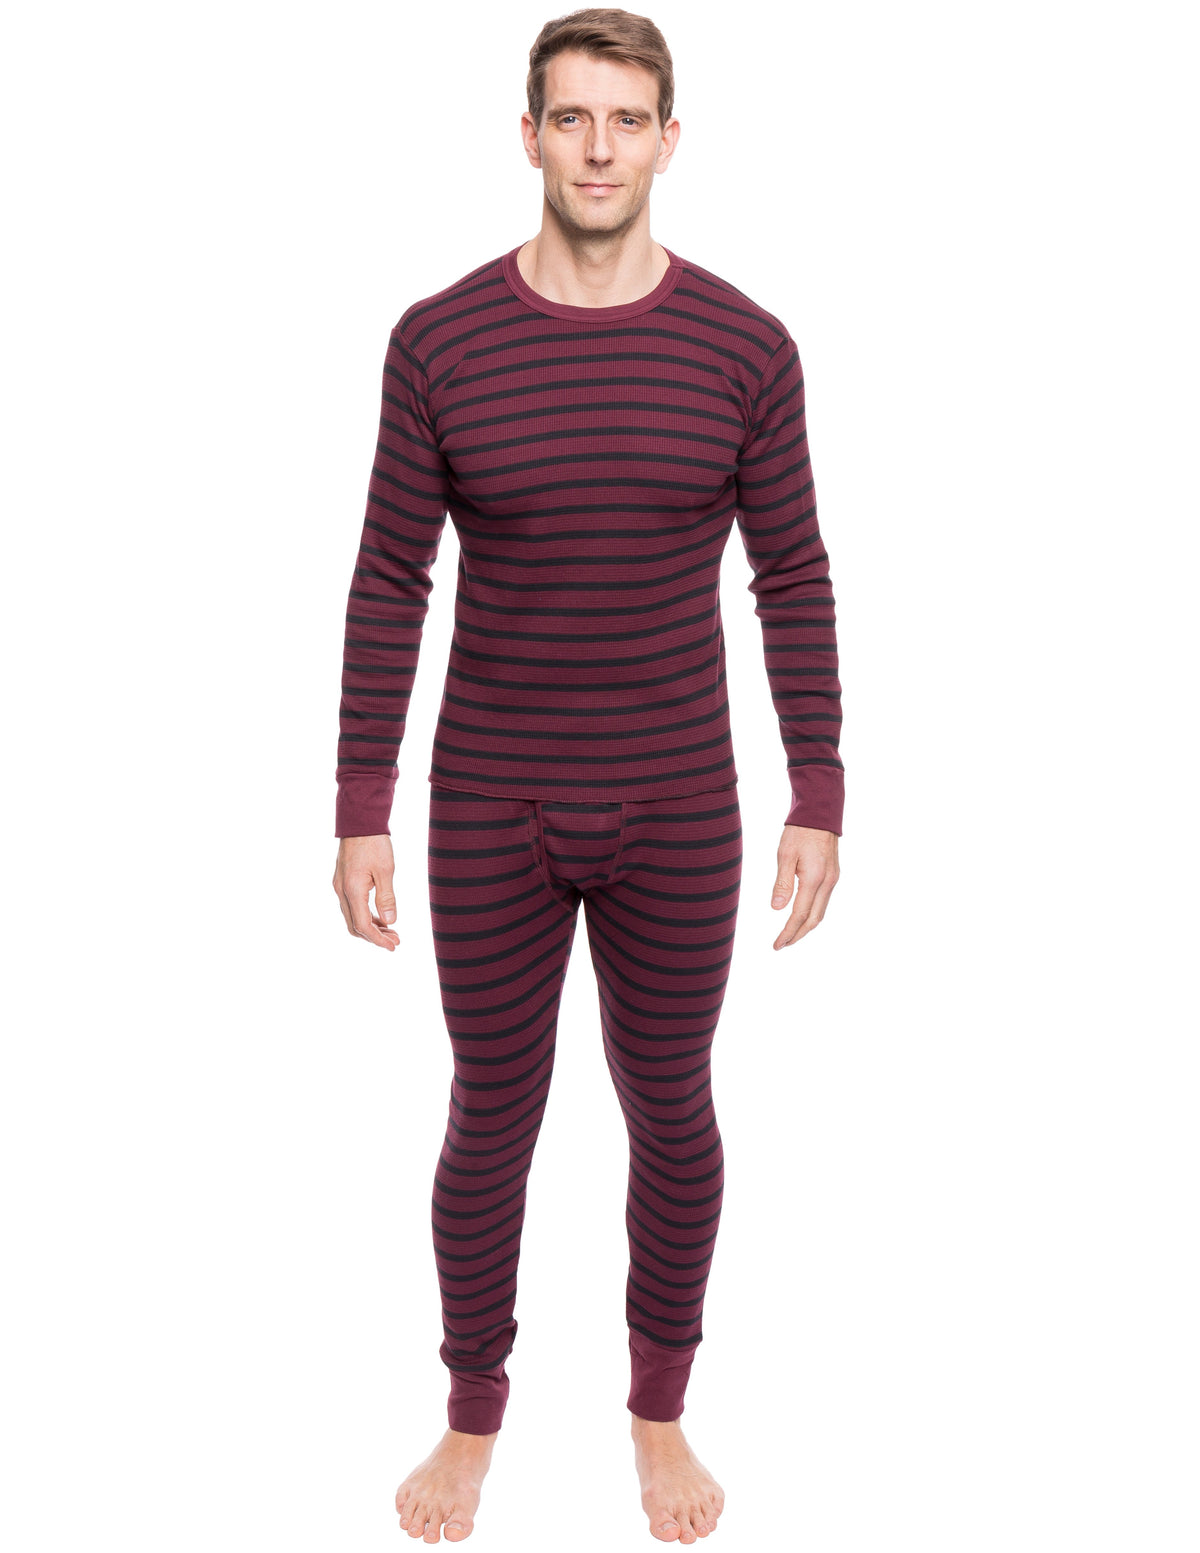 Men's Extreme Cold Waffle Knit Thermal Top and Bottom Set - Stripes Fig/Black